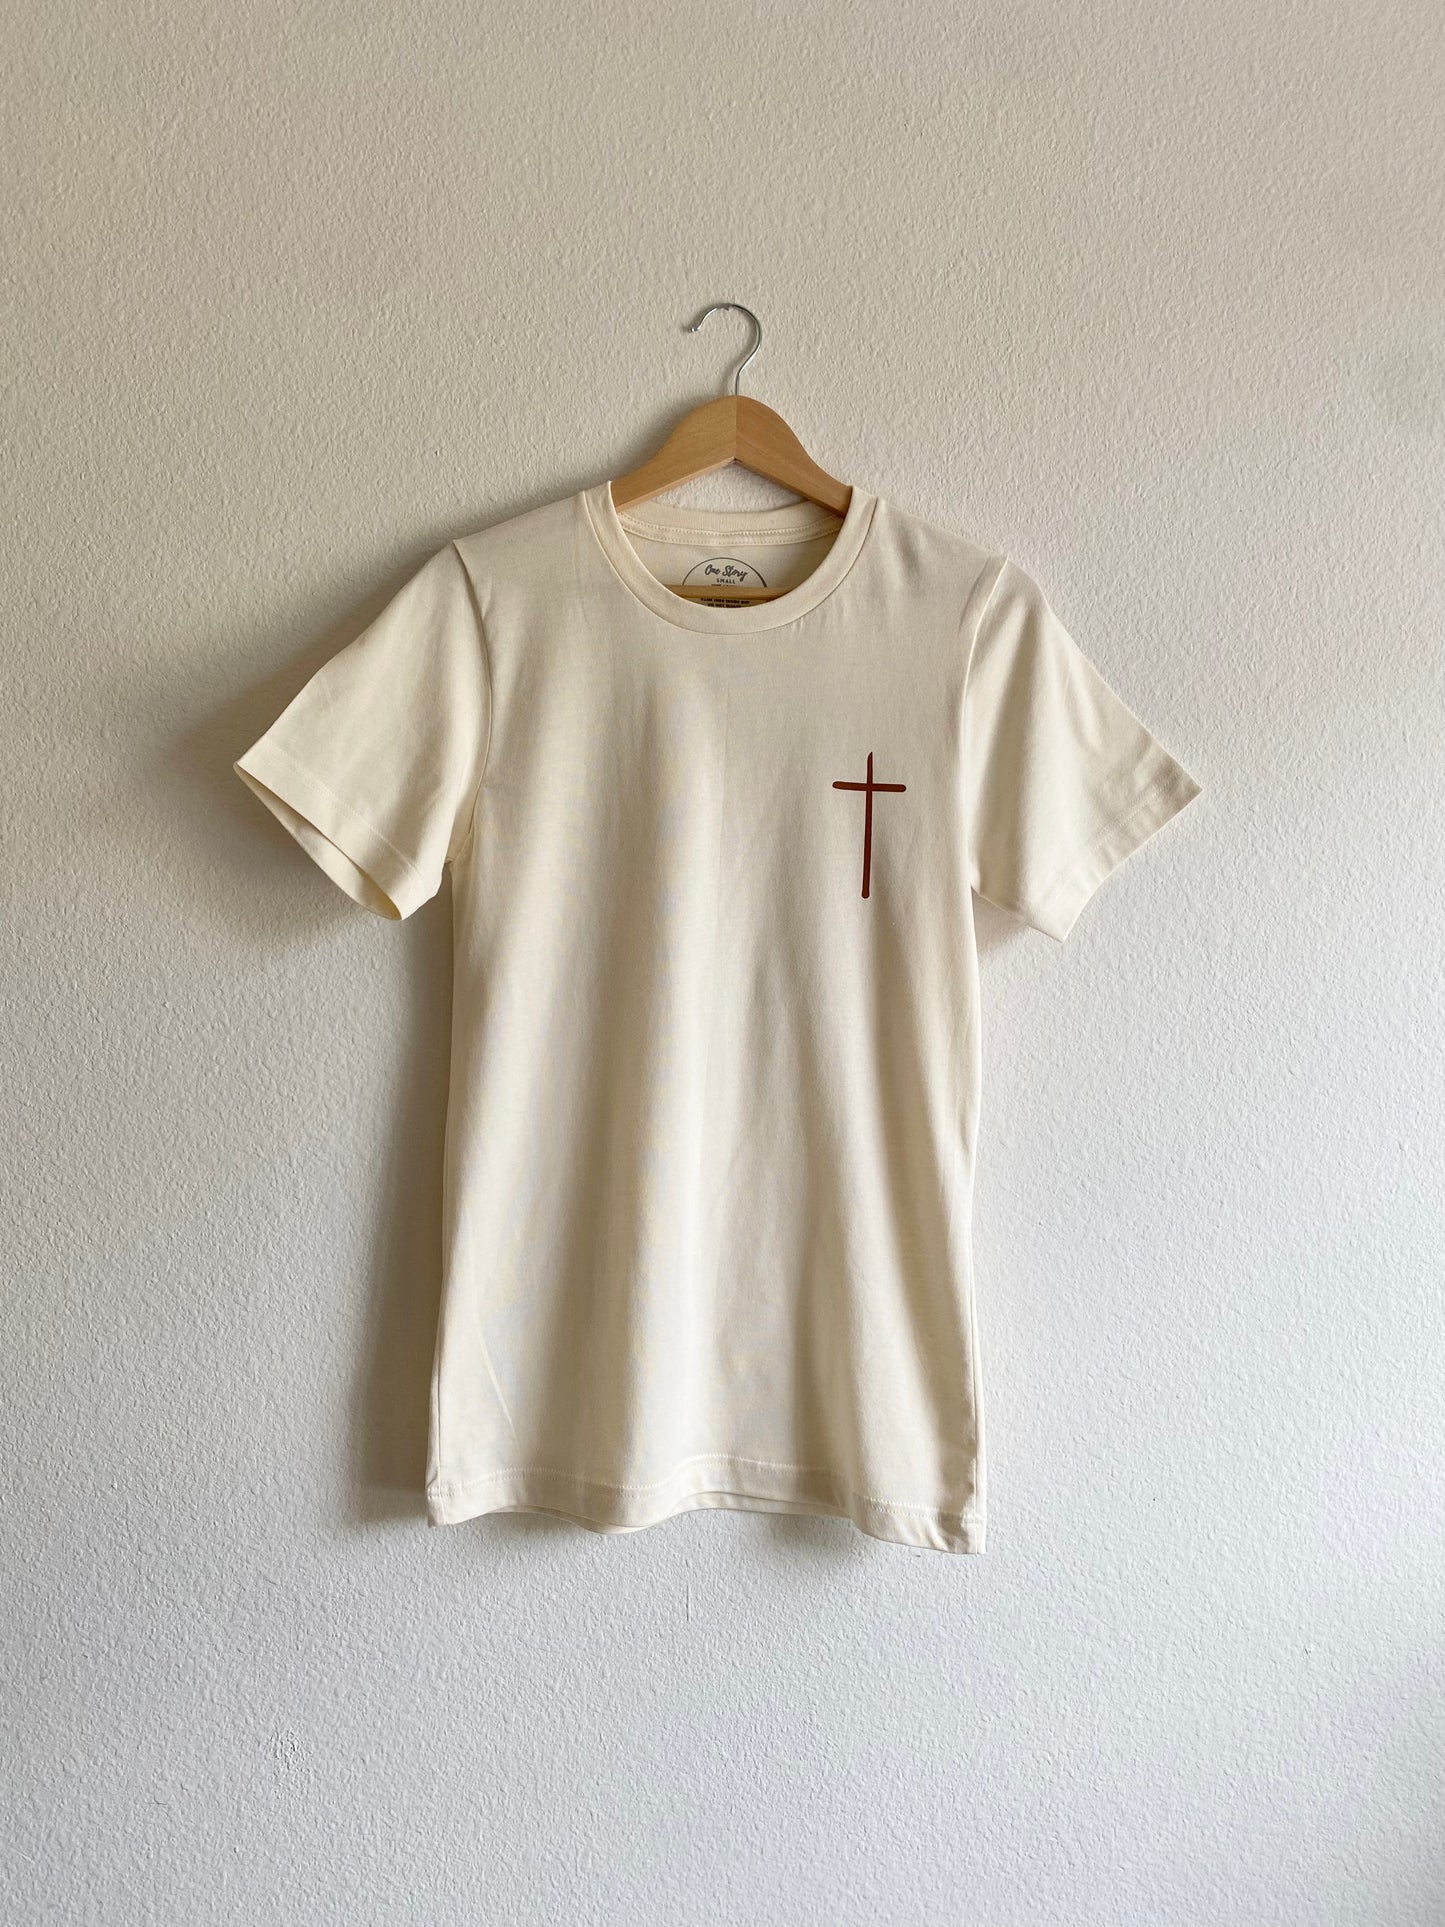 Jesus the Only Way Tee